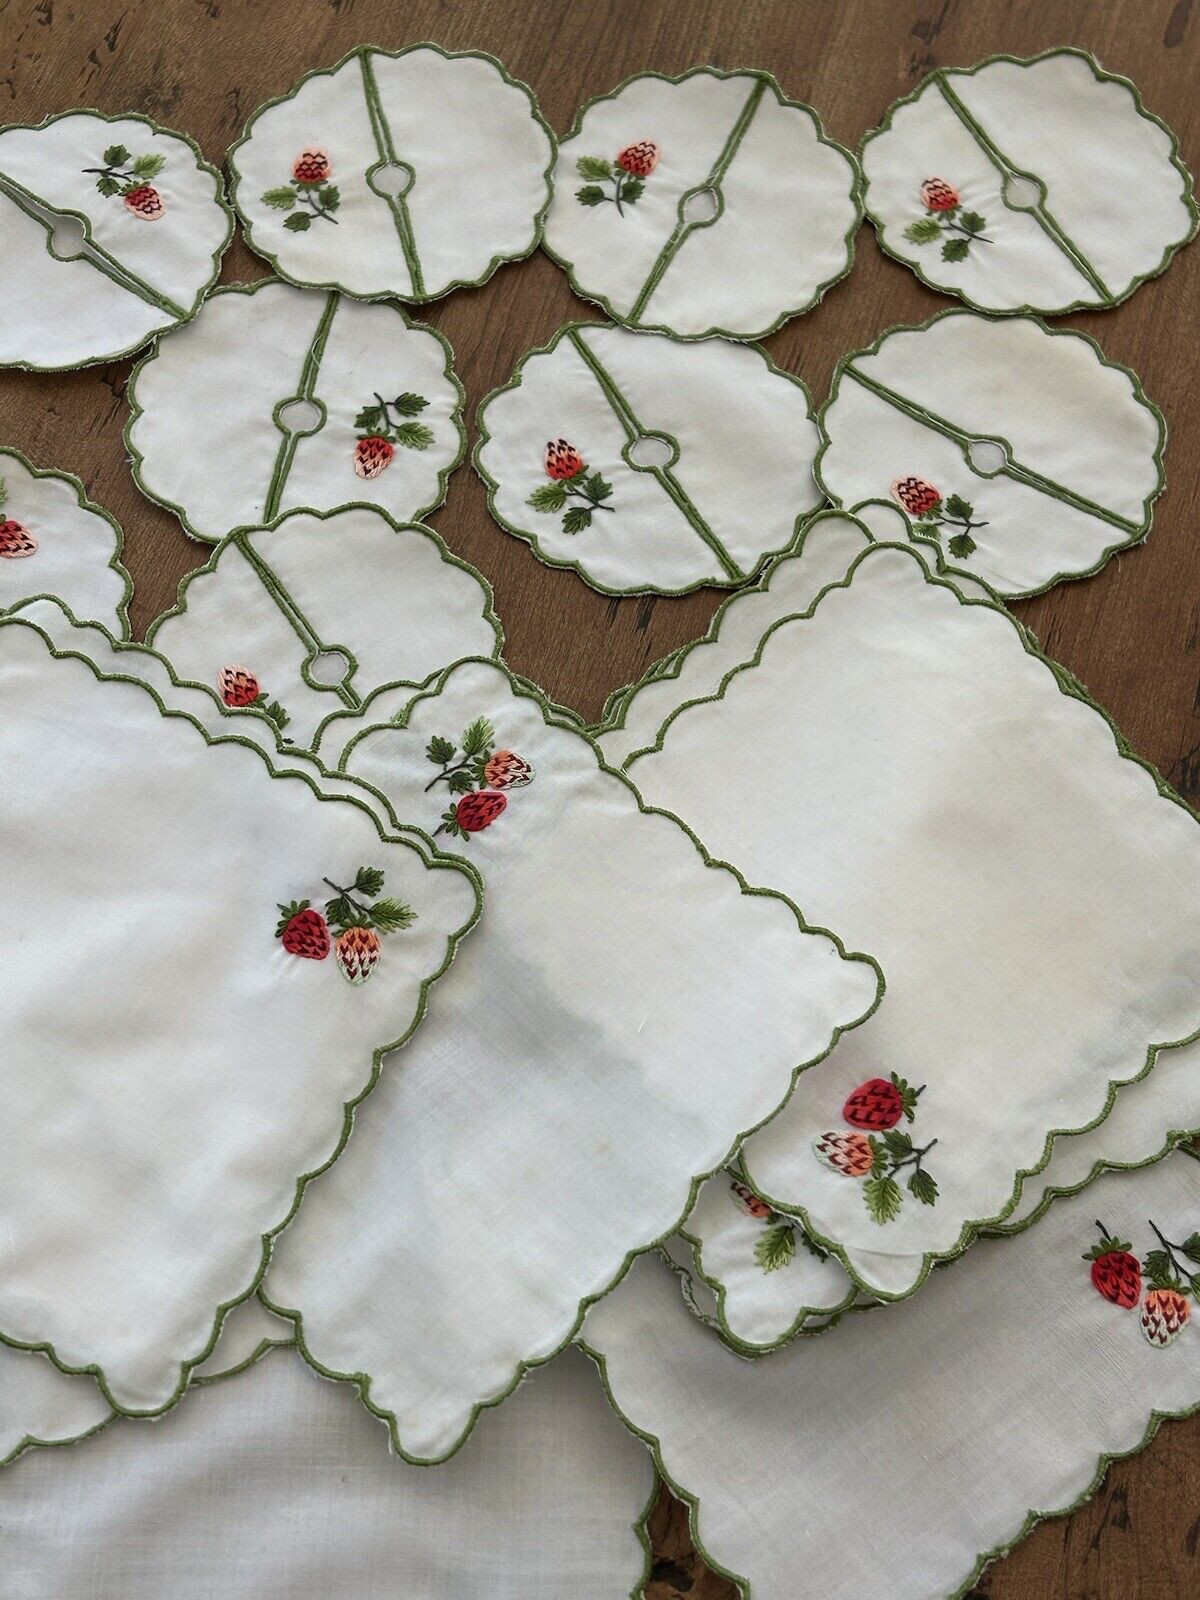 12 VTG Cocktail Napkins Embroidered Strawberries 12 Wine Glass Covers Scalloped